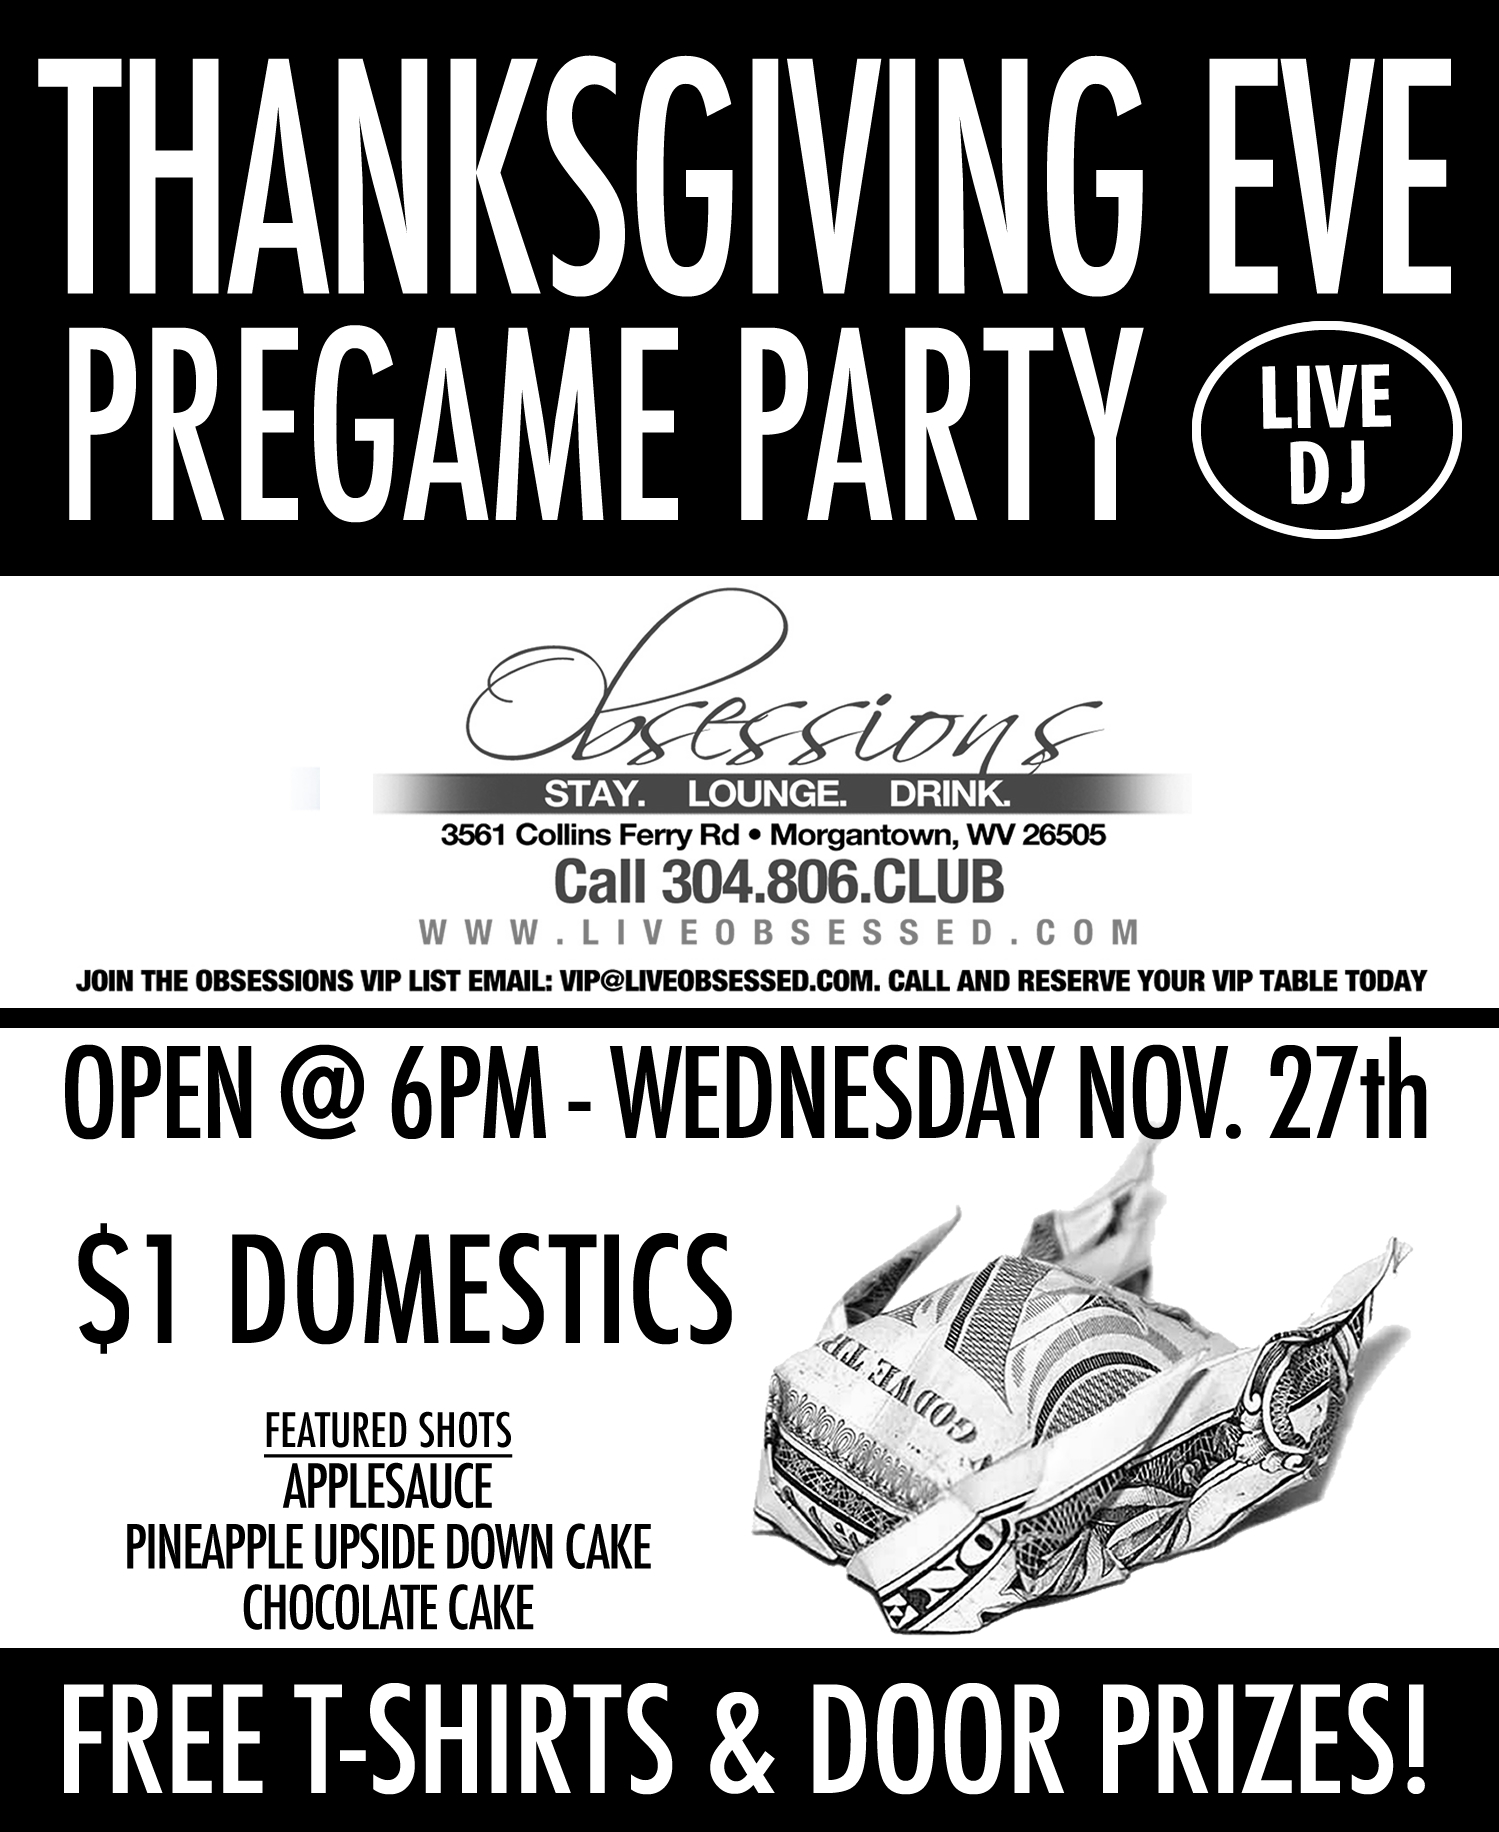 Club Obsessions Thanksgiving Eve Party –  Wednesday Nov. 27th – LIVE DJ – @getobsessed $1 DOMESTICS